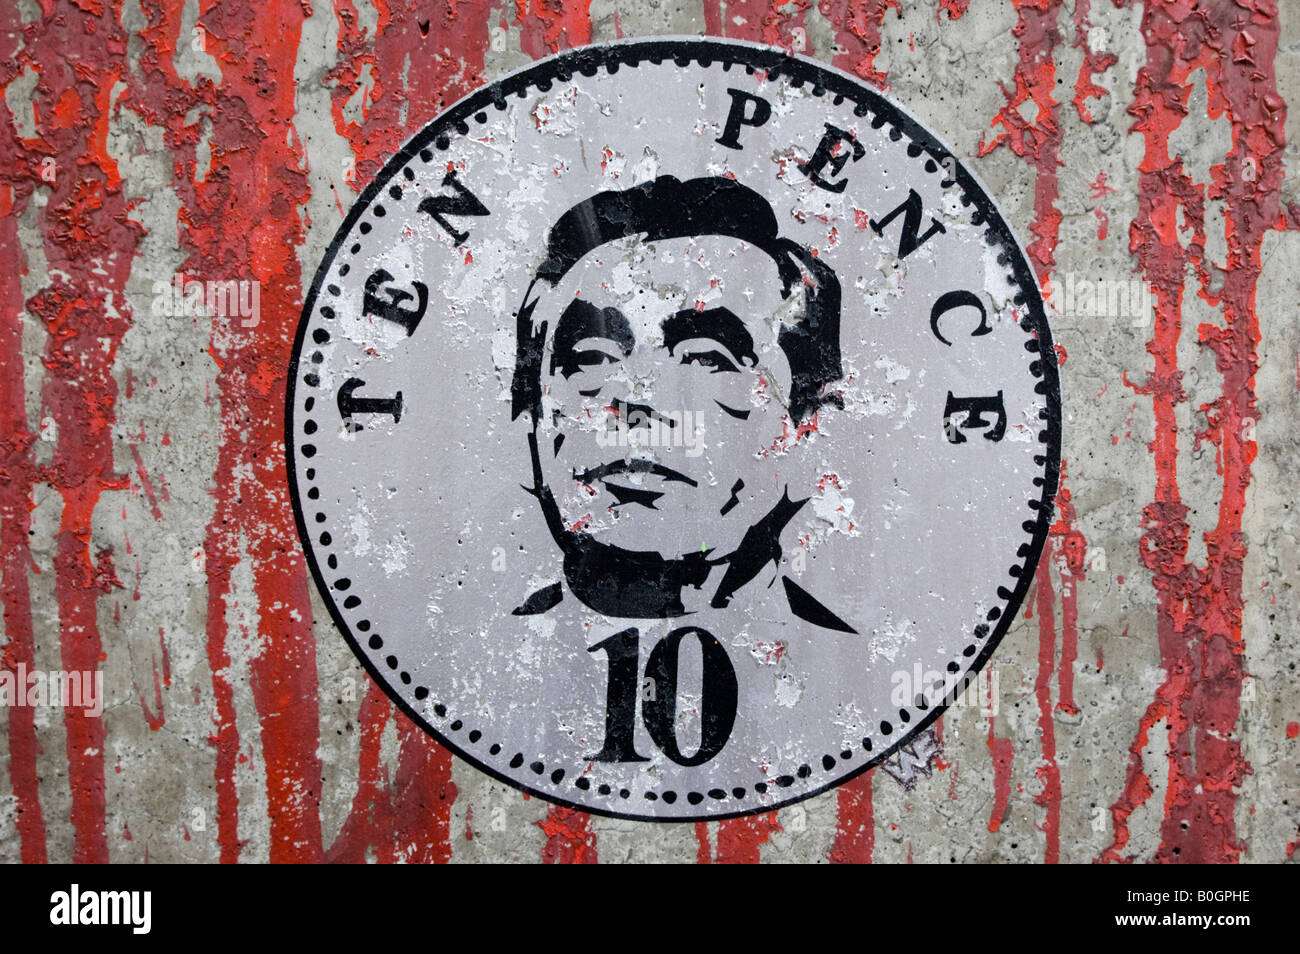 Graffiti art of Prime Minister Gordon Brown in 10p coin at the Cans Festival in Waterloo London England UK Stock Photo